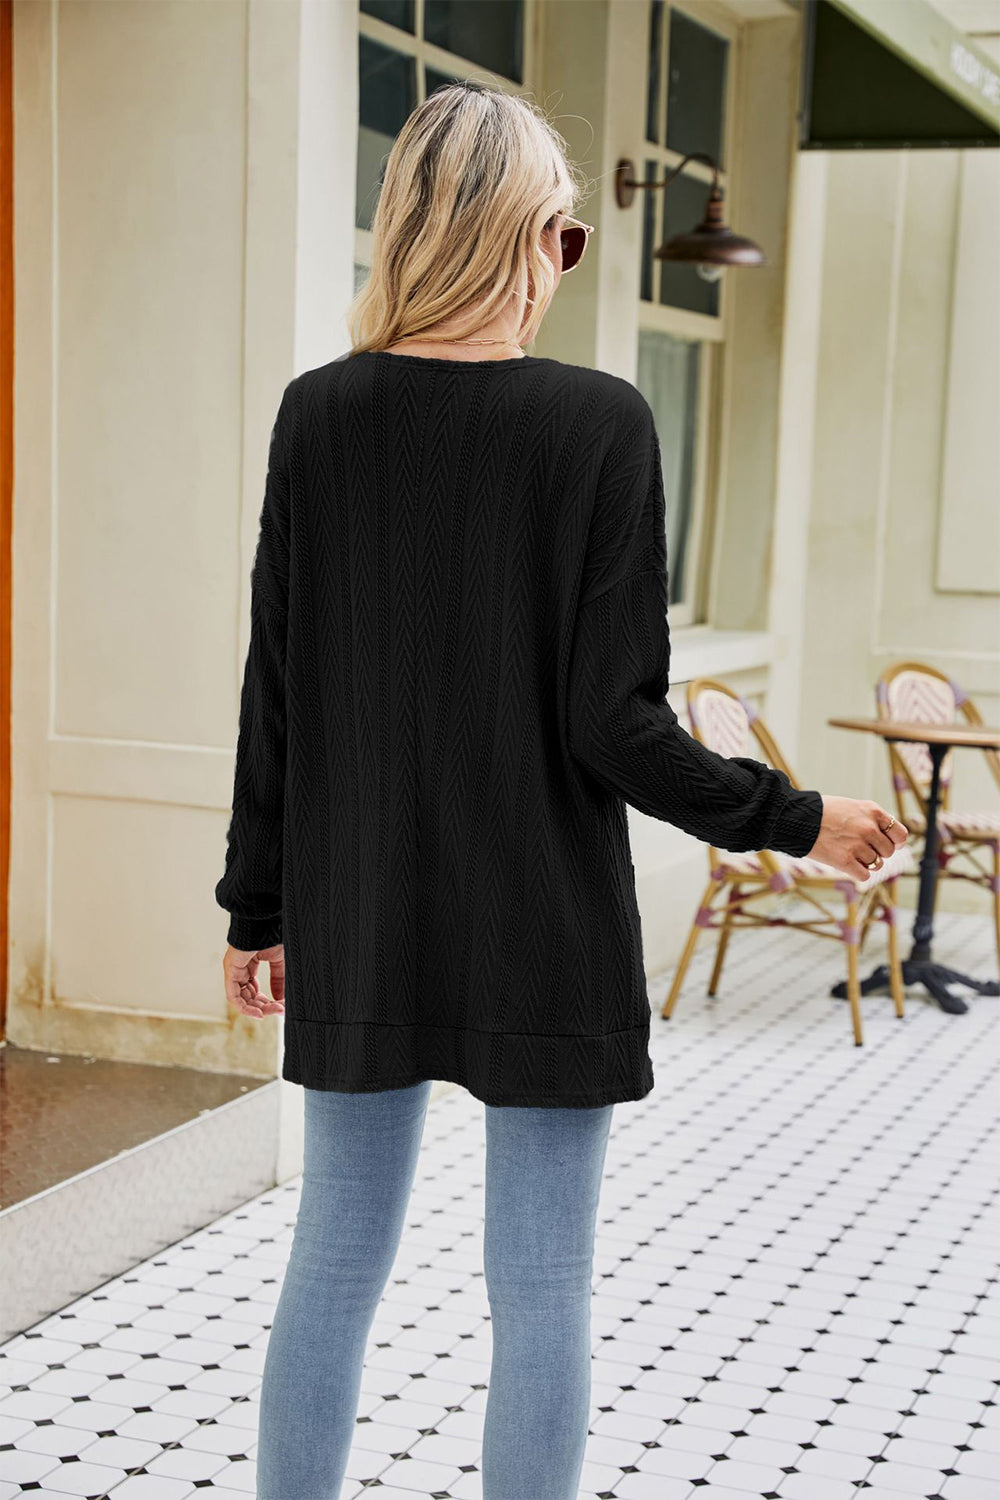 Long Sleeve Pocketed Cardigan - Women’s Clothing & Accessories - Shirts & Tops - 8 - 2024